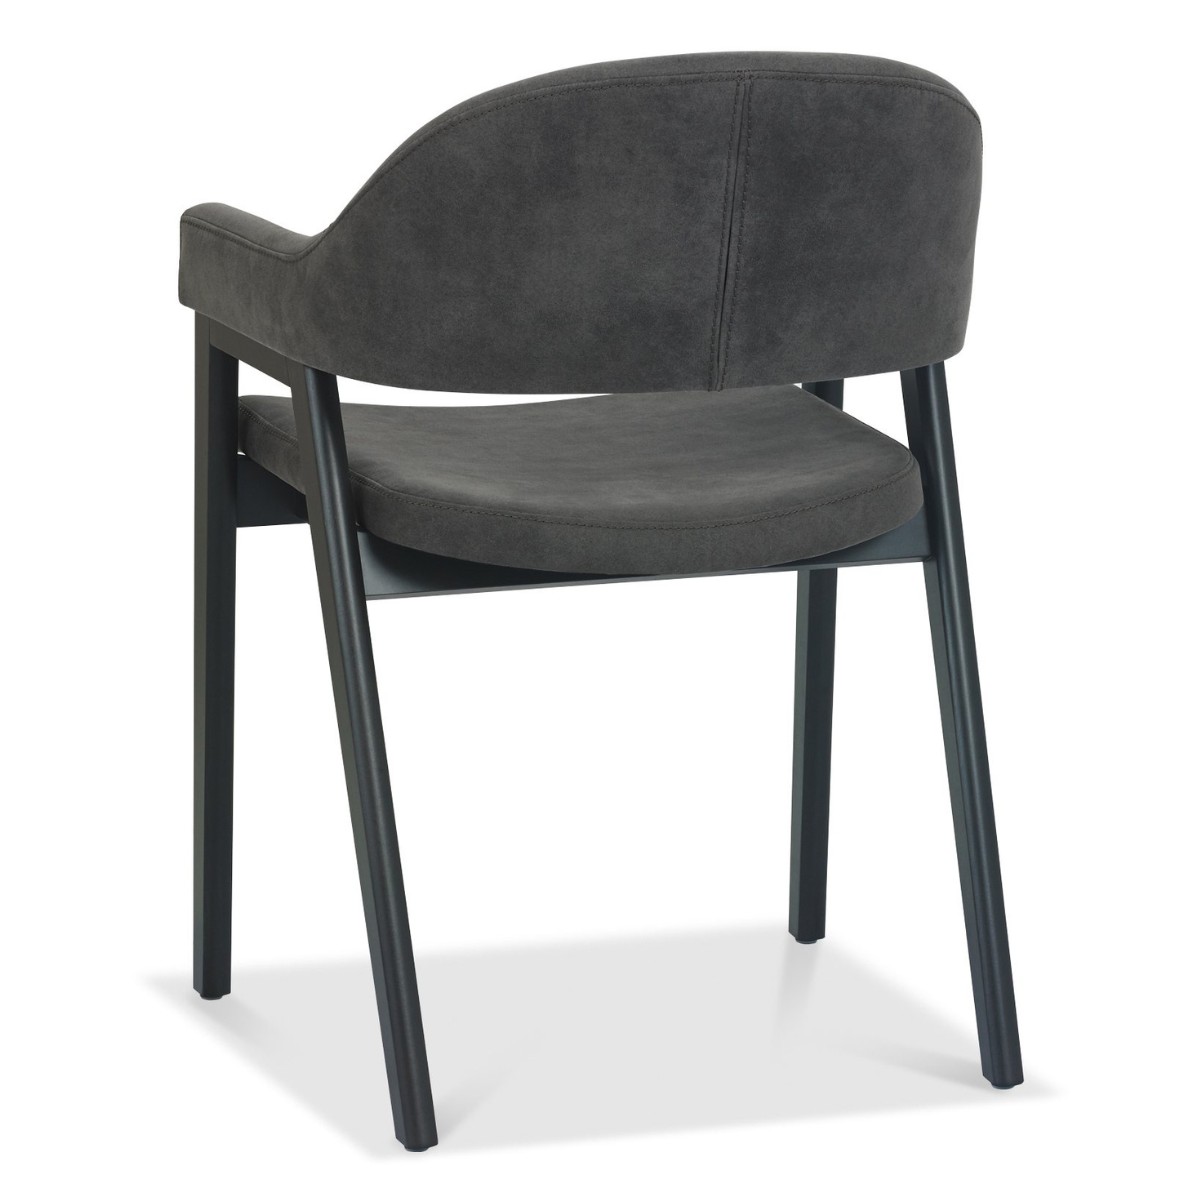 Chambery Weathered Oak Curved Back Dining Chair Grey- 3